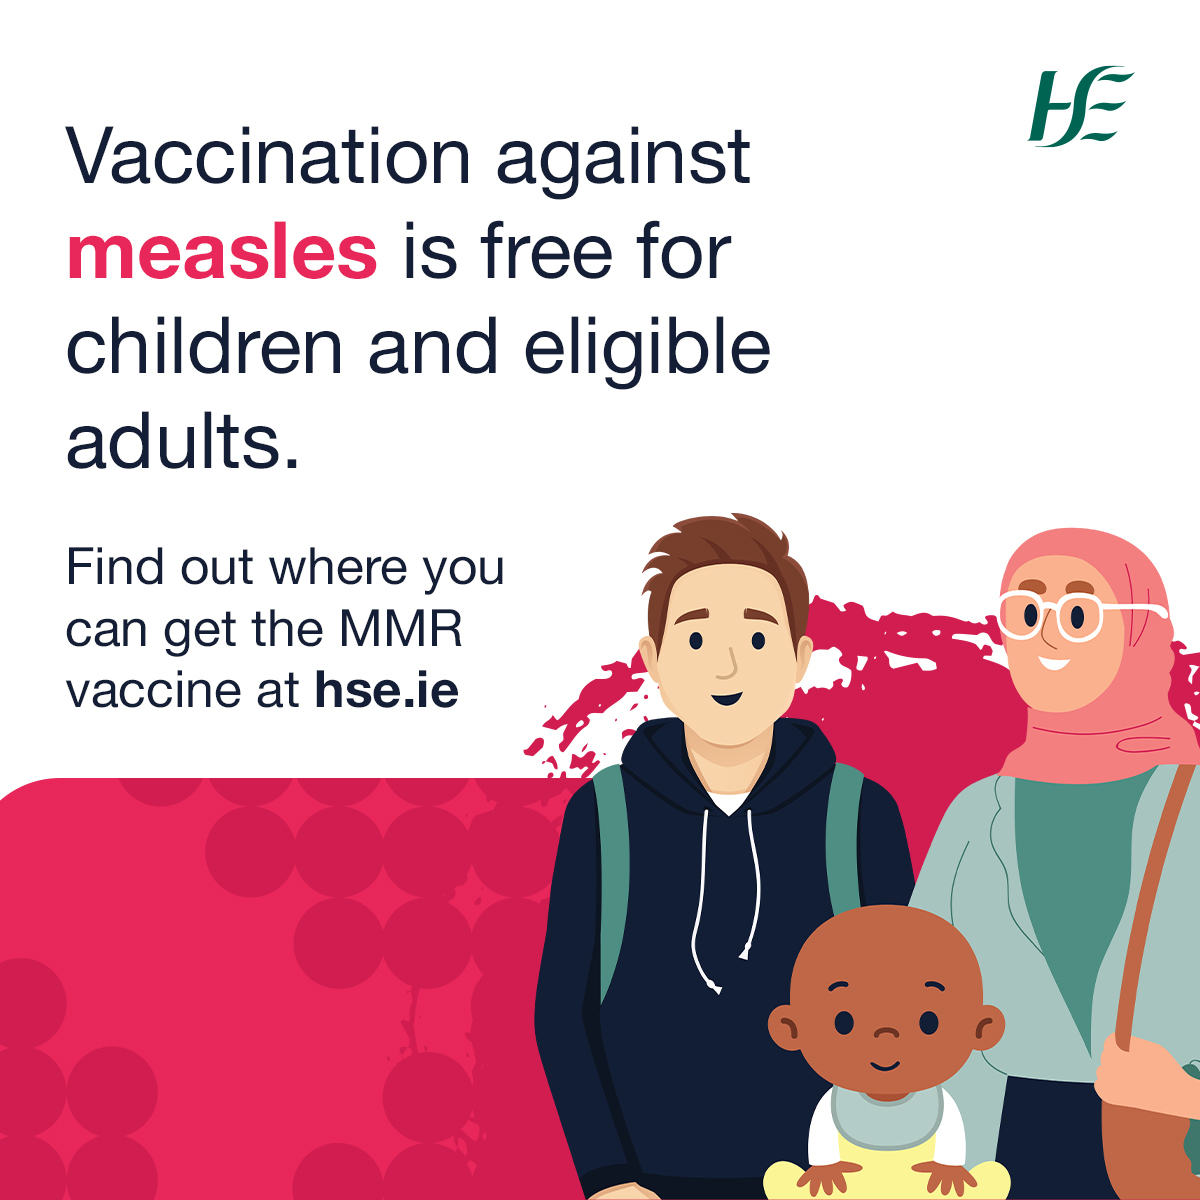 Vaccination against measles is free for children and eligible adults. Don't let cost be a barrier to protecting your health. Visit our website to find out how to get the vaccine: bit.ly/3VkPQNe